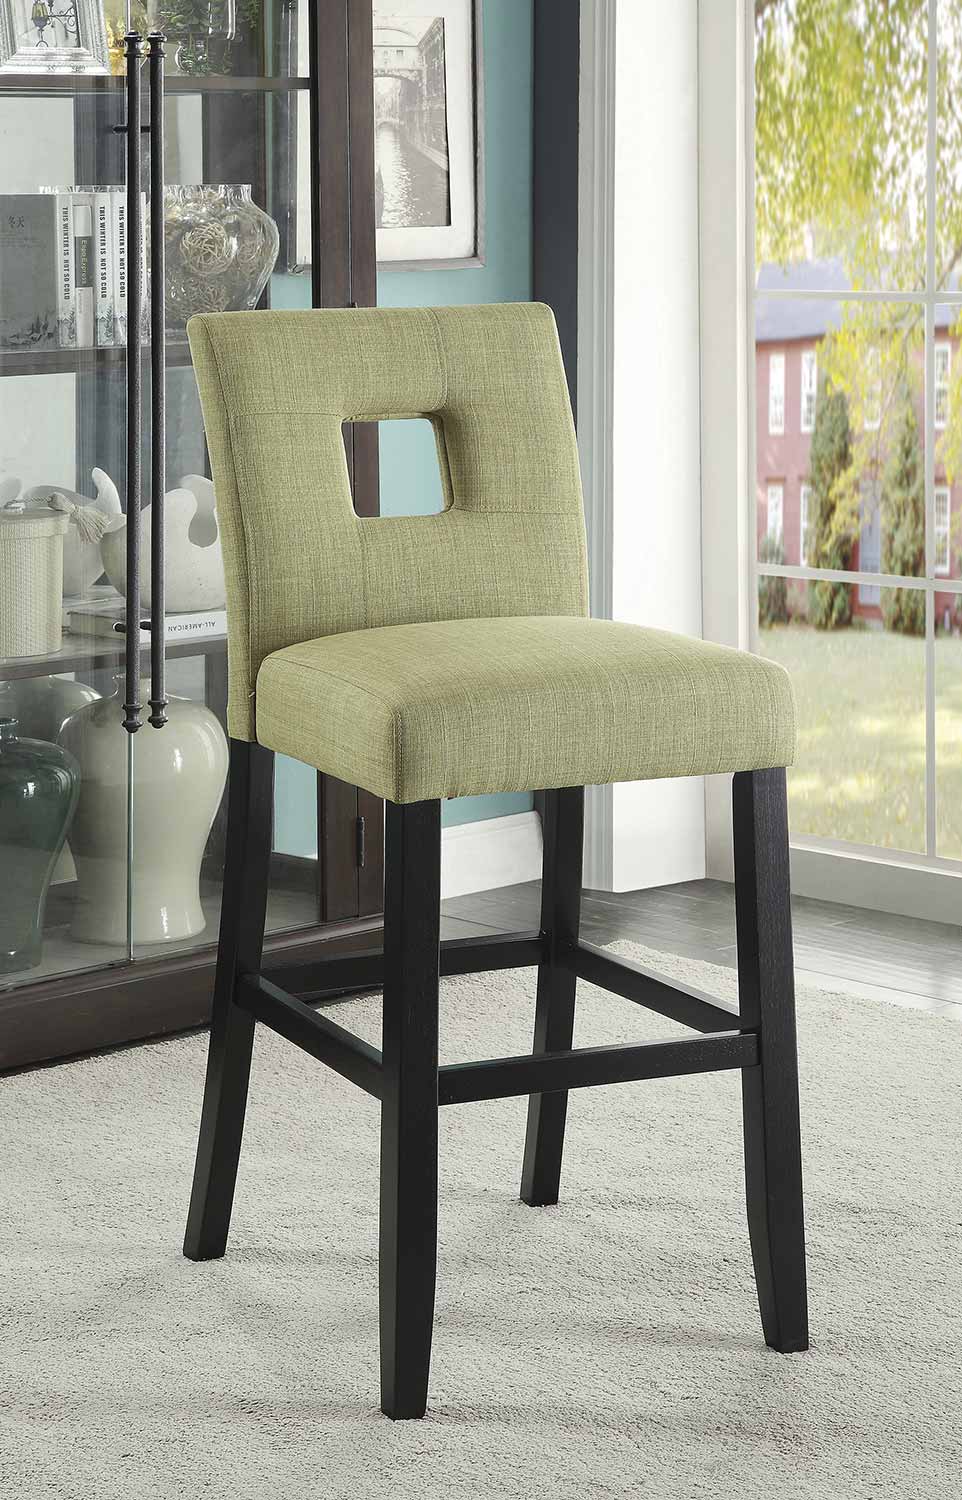 Coaster Andenne Counter Height Chair - Green/Black